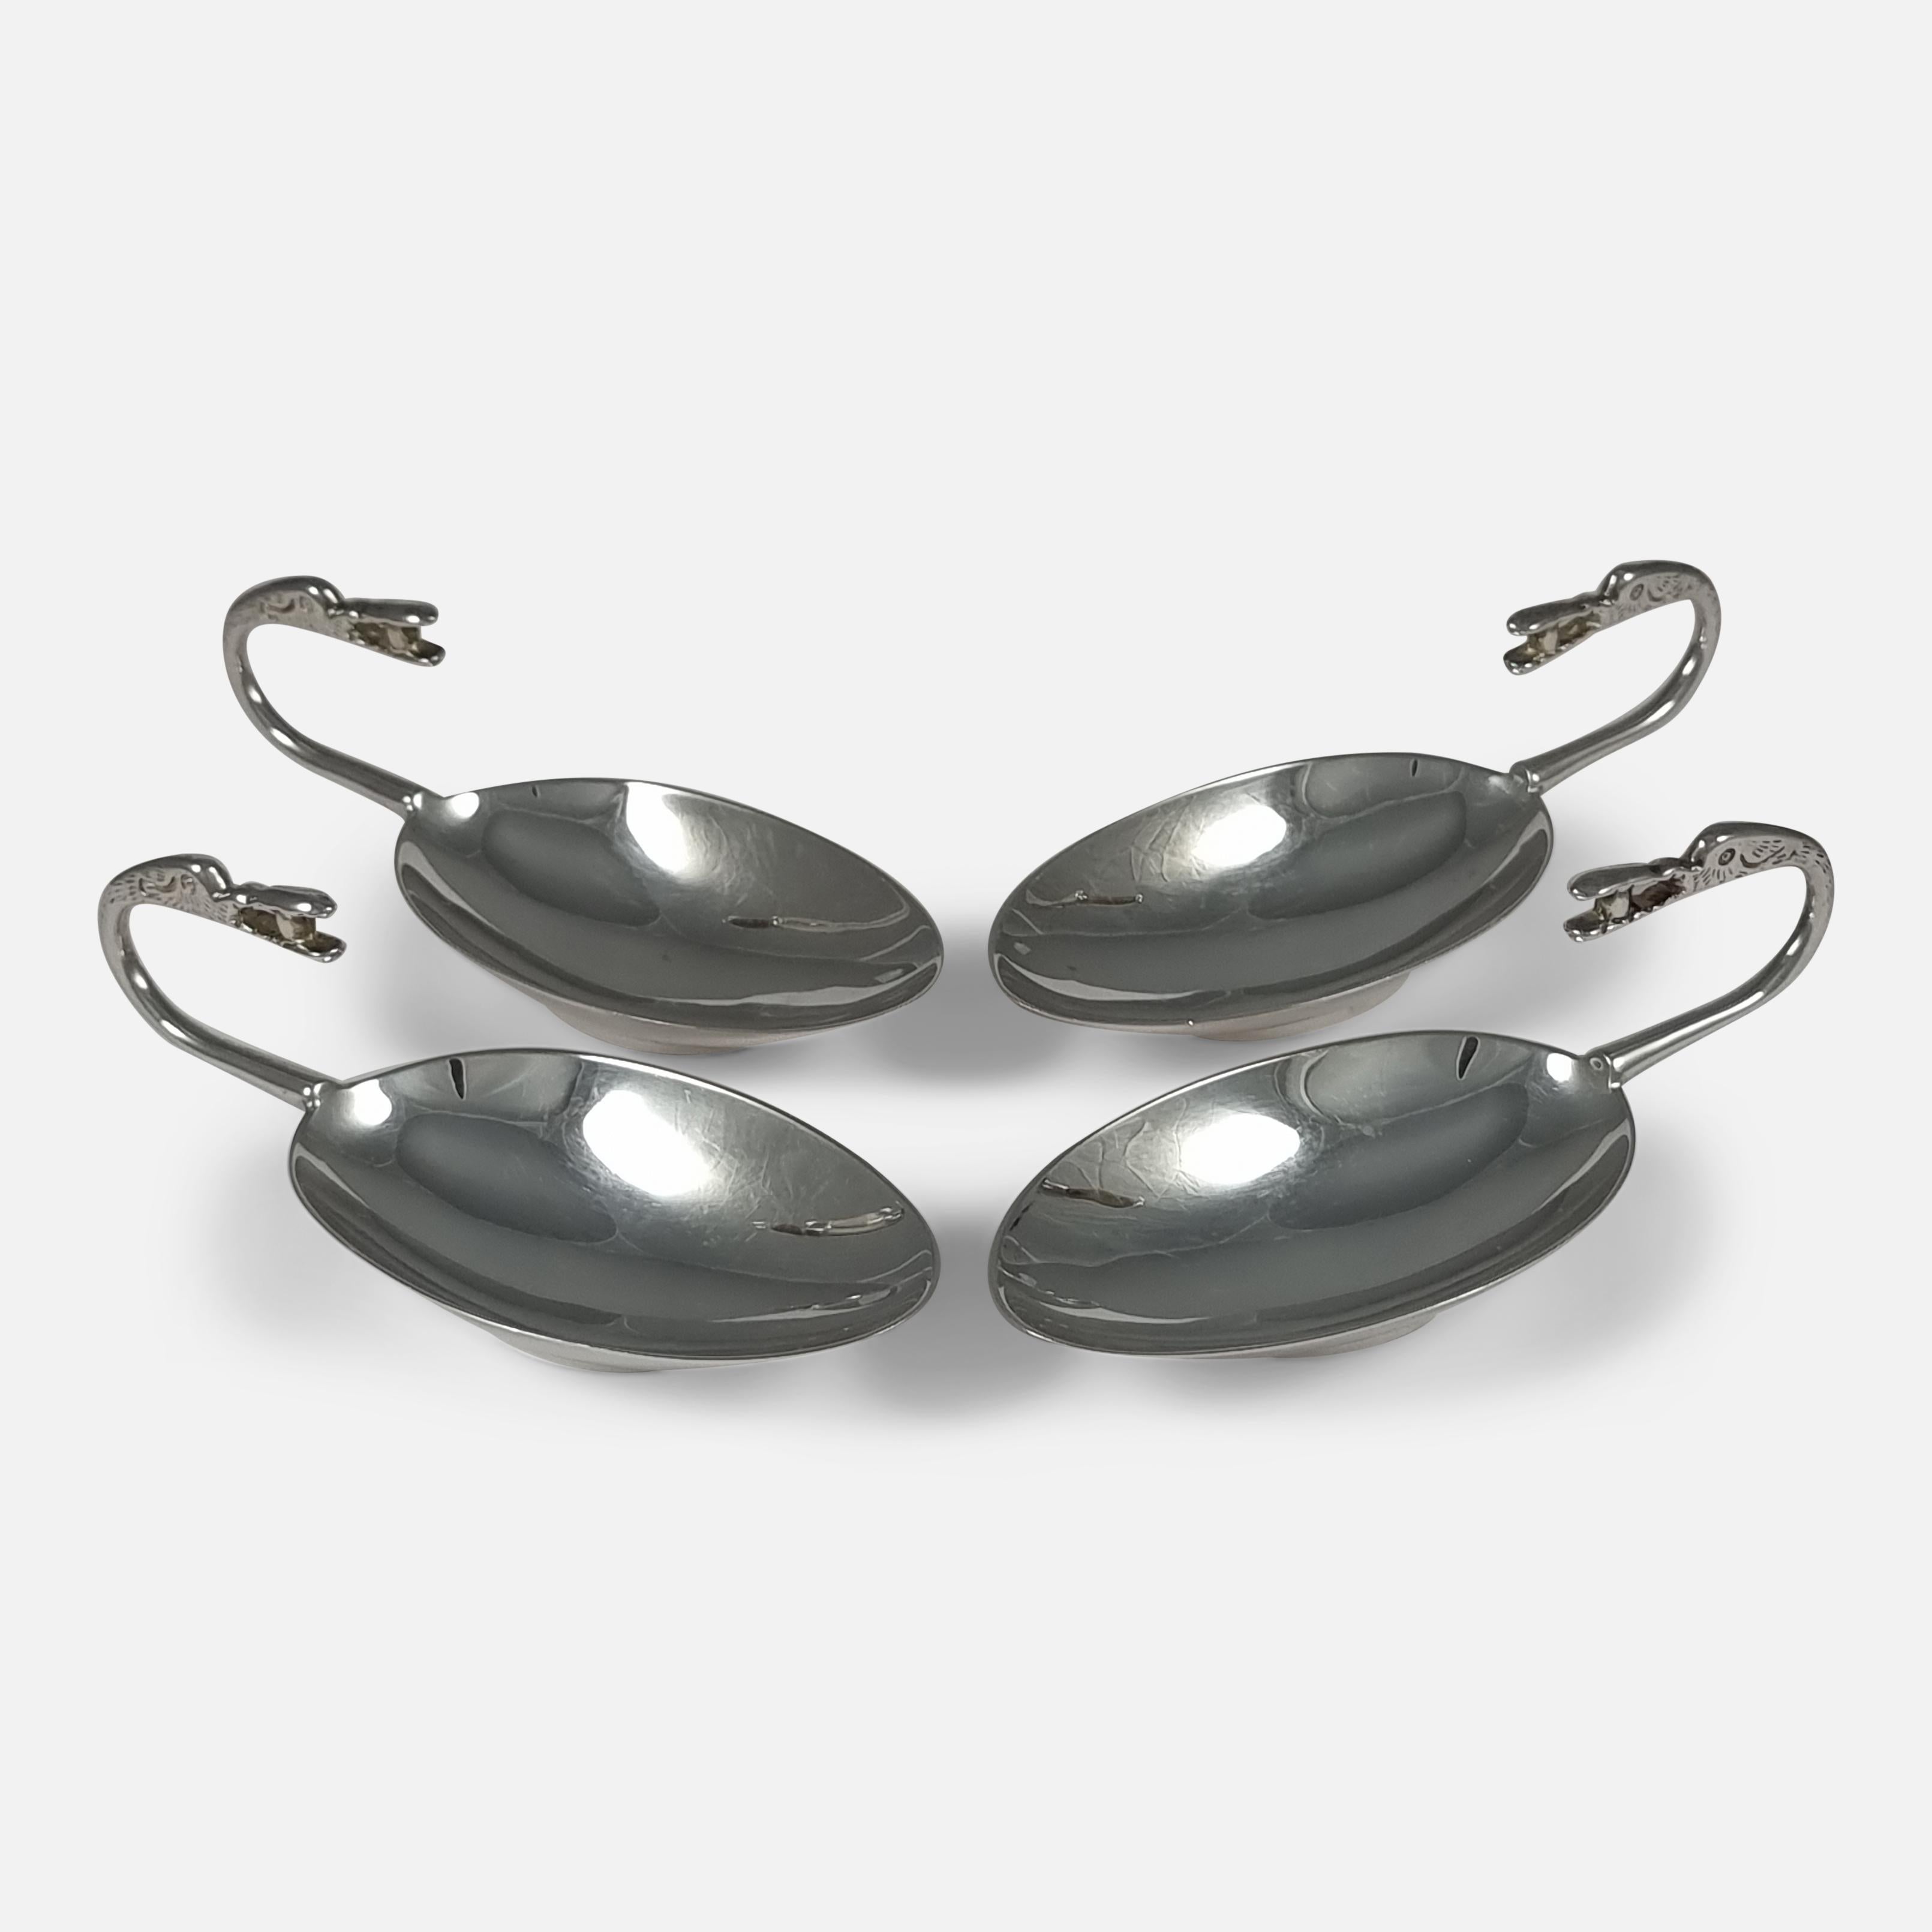 A set of four sterling silver Traprain Dishes or Tastevins, replicated from a design found in the Roman silver hoard at Traprain Law, Edinburgh, Scotland, in 1919. The dishes have an egg-shaped bowl on a foot, with a handle ending in a mythical